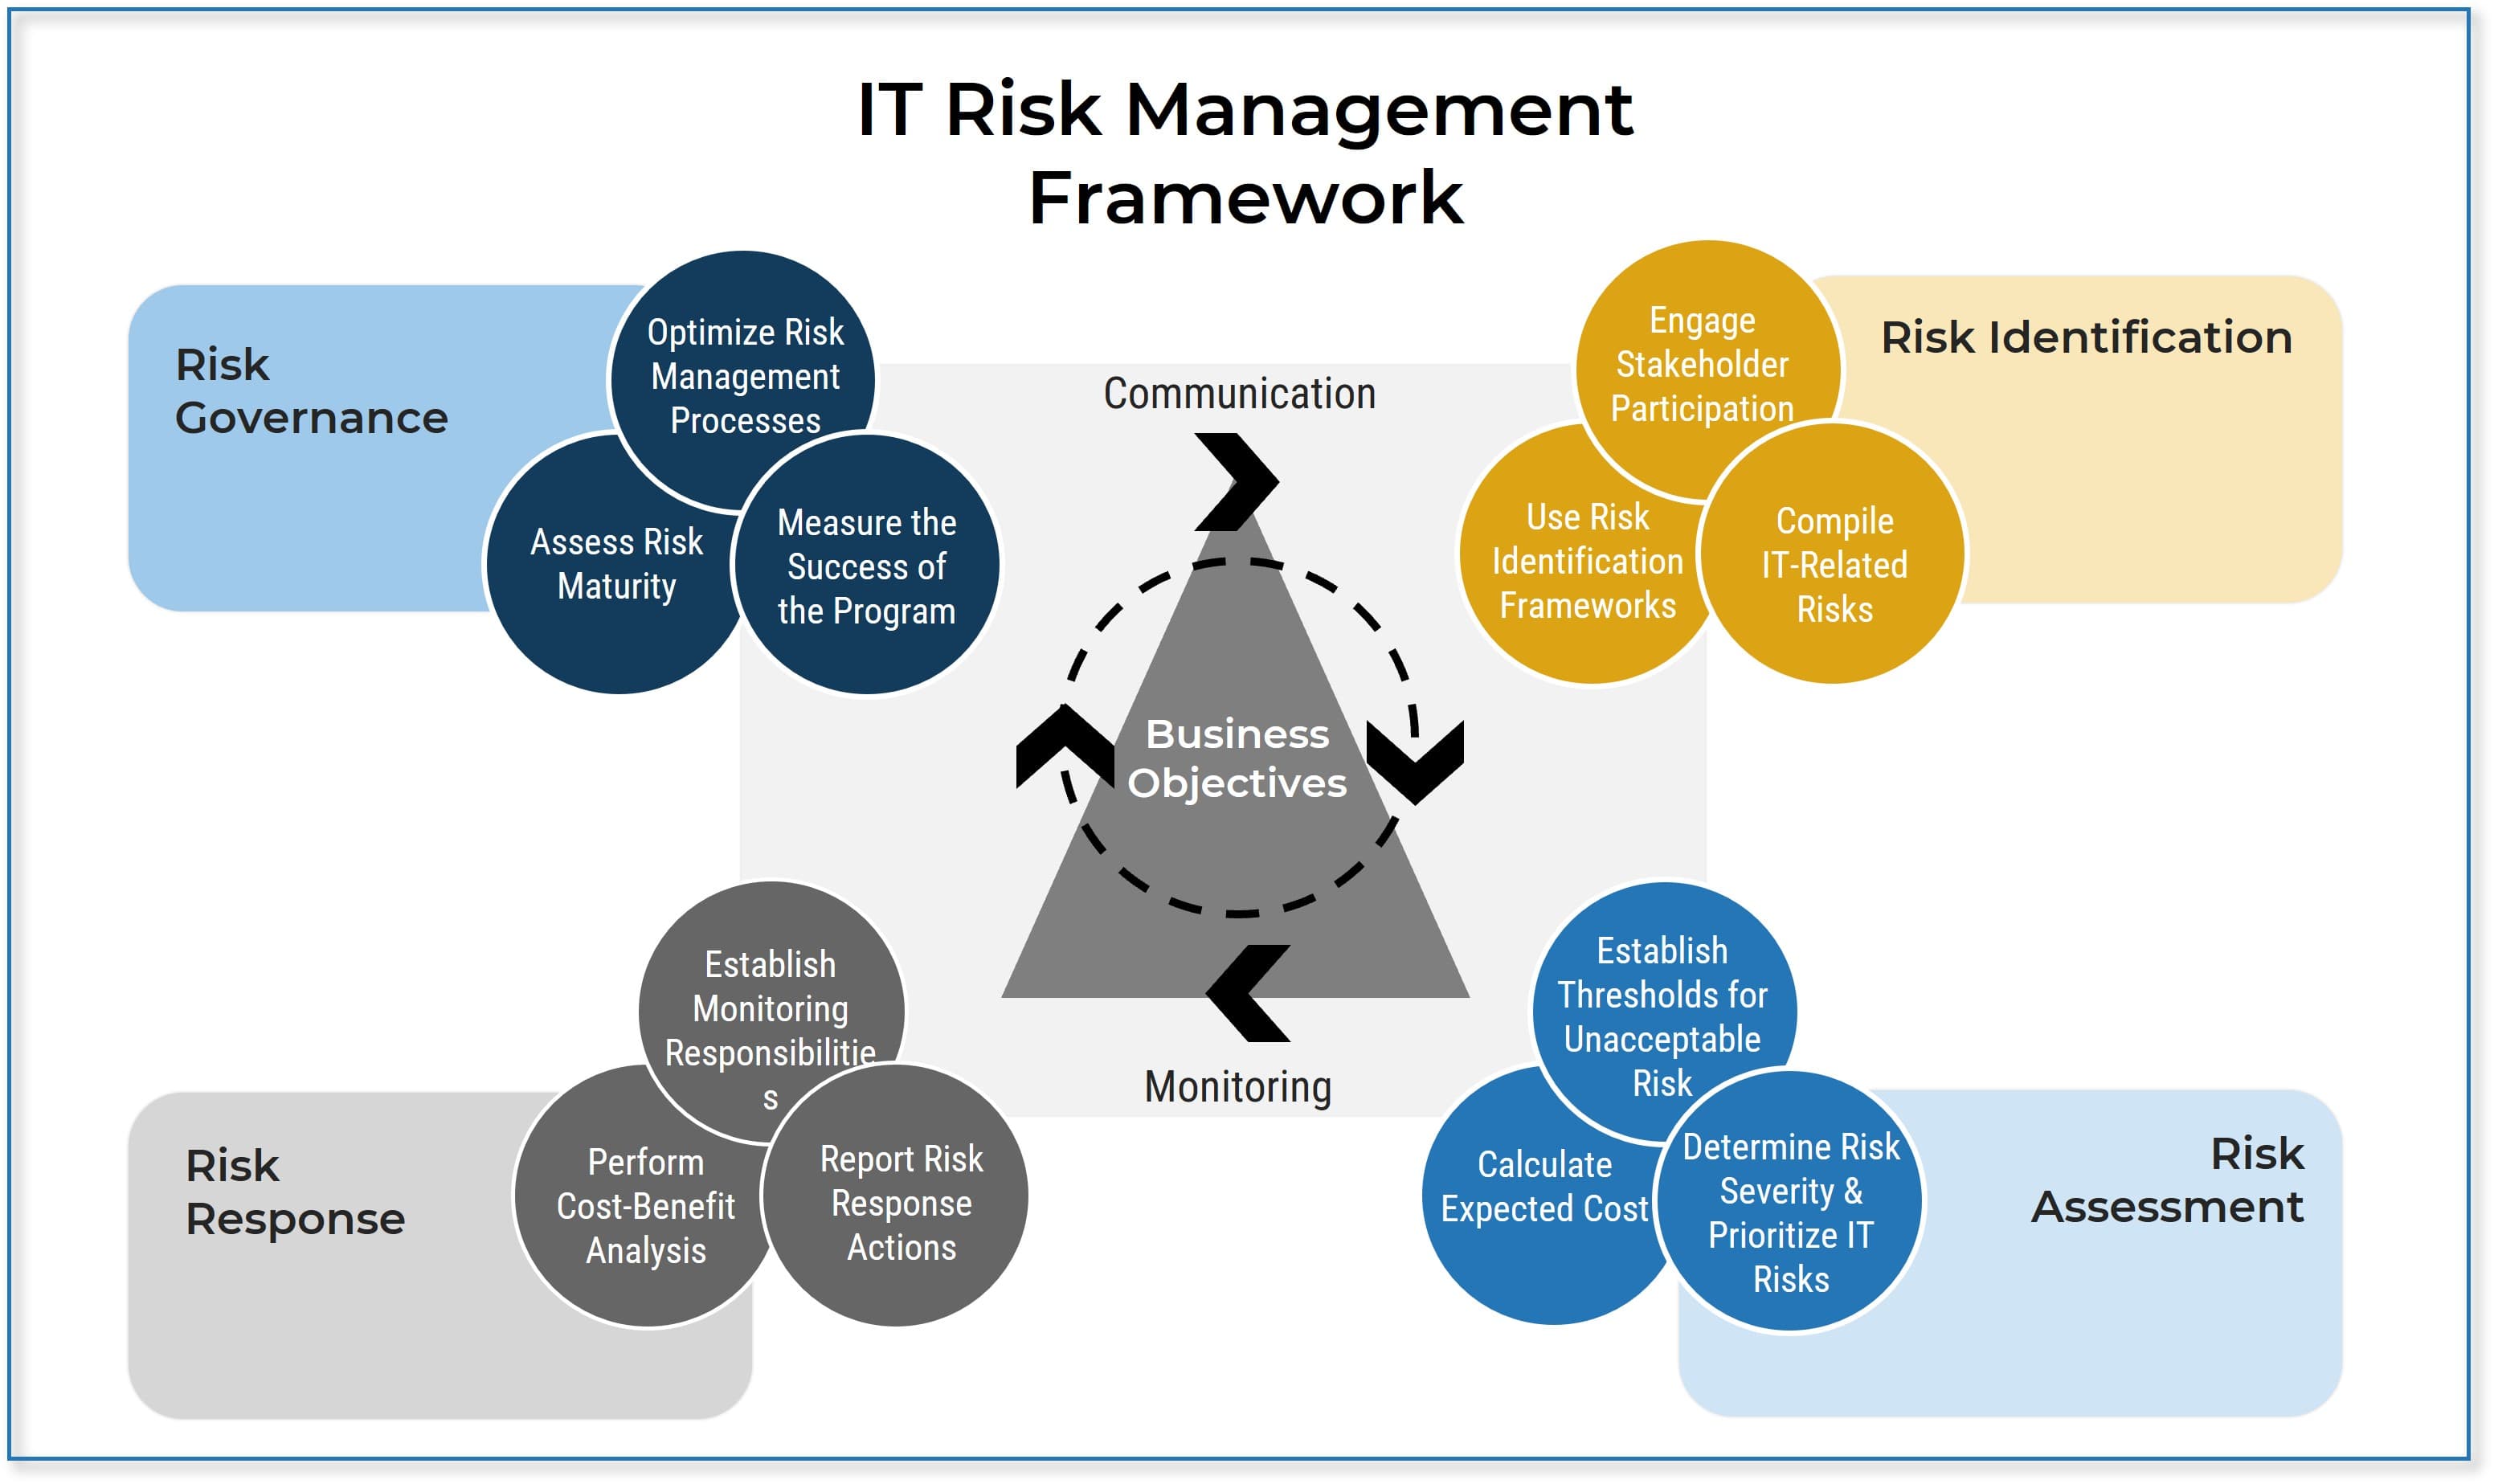 The image contains a screenshot of the IT Risk Management Framework. The framework includes: Risk Identification, Risk Assessment, Risk Response, and Risk Governance.